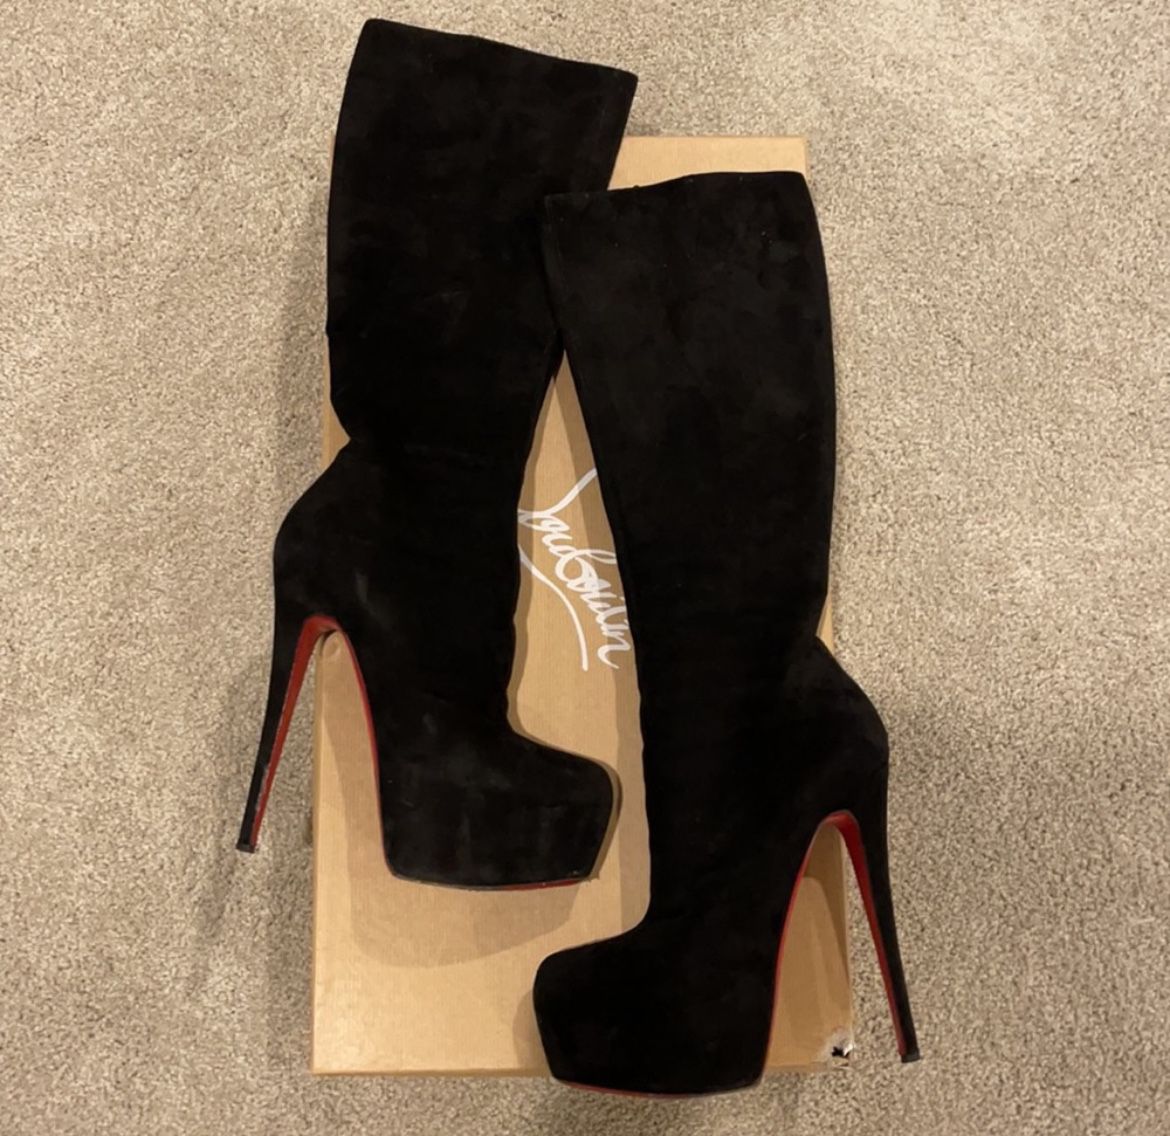 Christian Louboutin daffodil Suede Boots Size 37 USA 7 